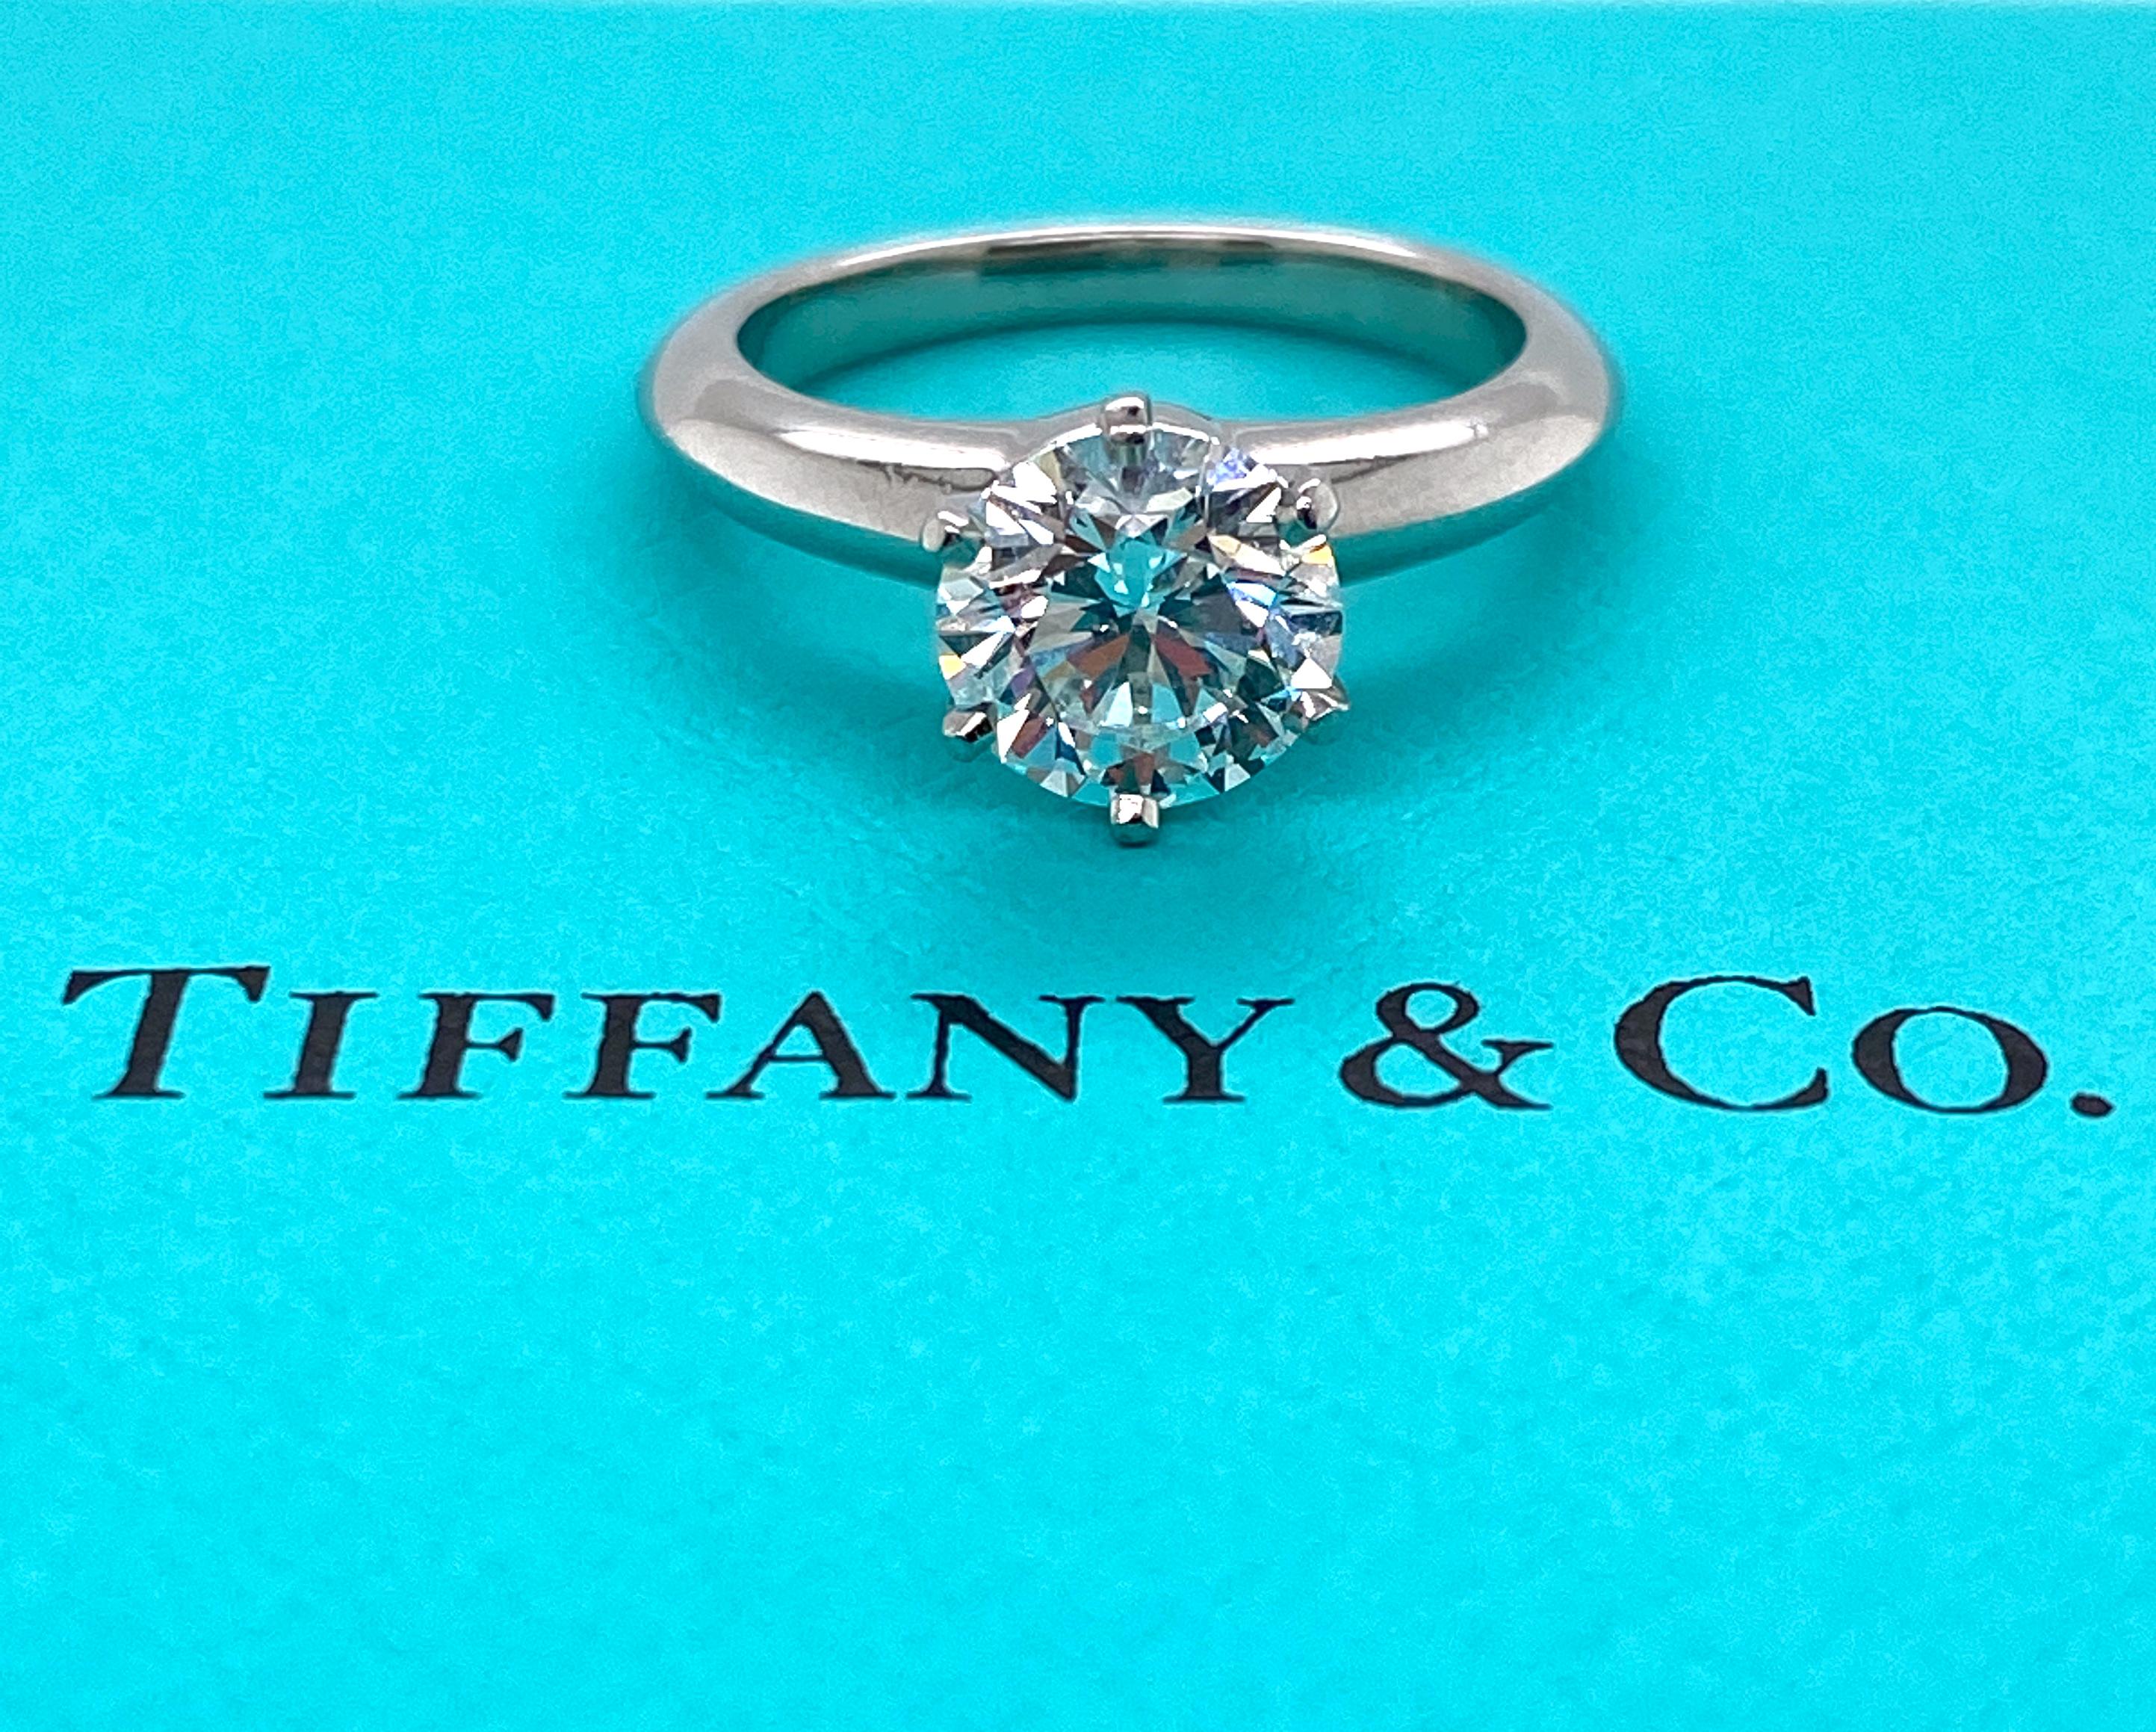 Tiffany & Co Engagement Ring 1.29ct F-VS1  Diamond Solitaire Platinum


Featuring a SUPERB Tiffany Certified 1.29ct F-VS1 Natural Diamond Center

Tiffany’s Retail Price on this Ring is $28,938.00, Tax Included

100% Genuine Tiffany with the Tiffany